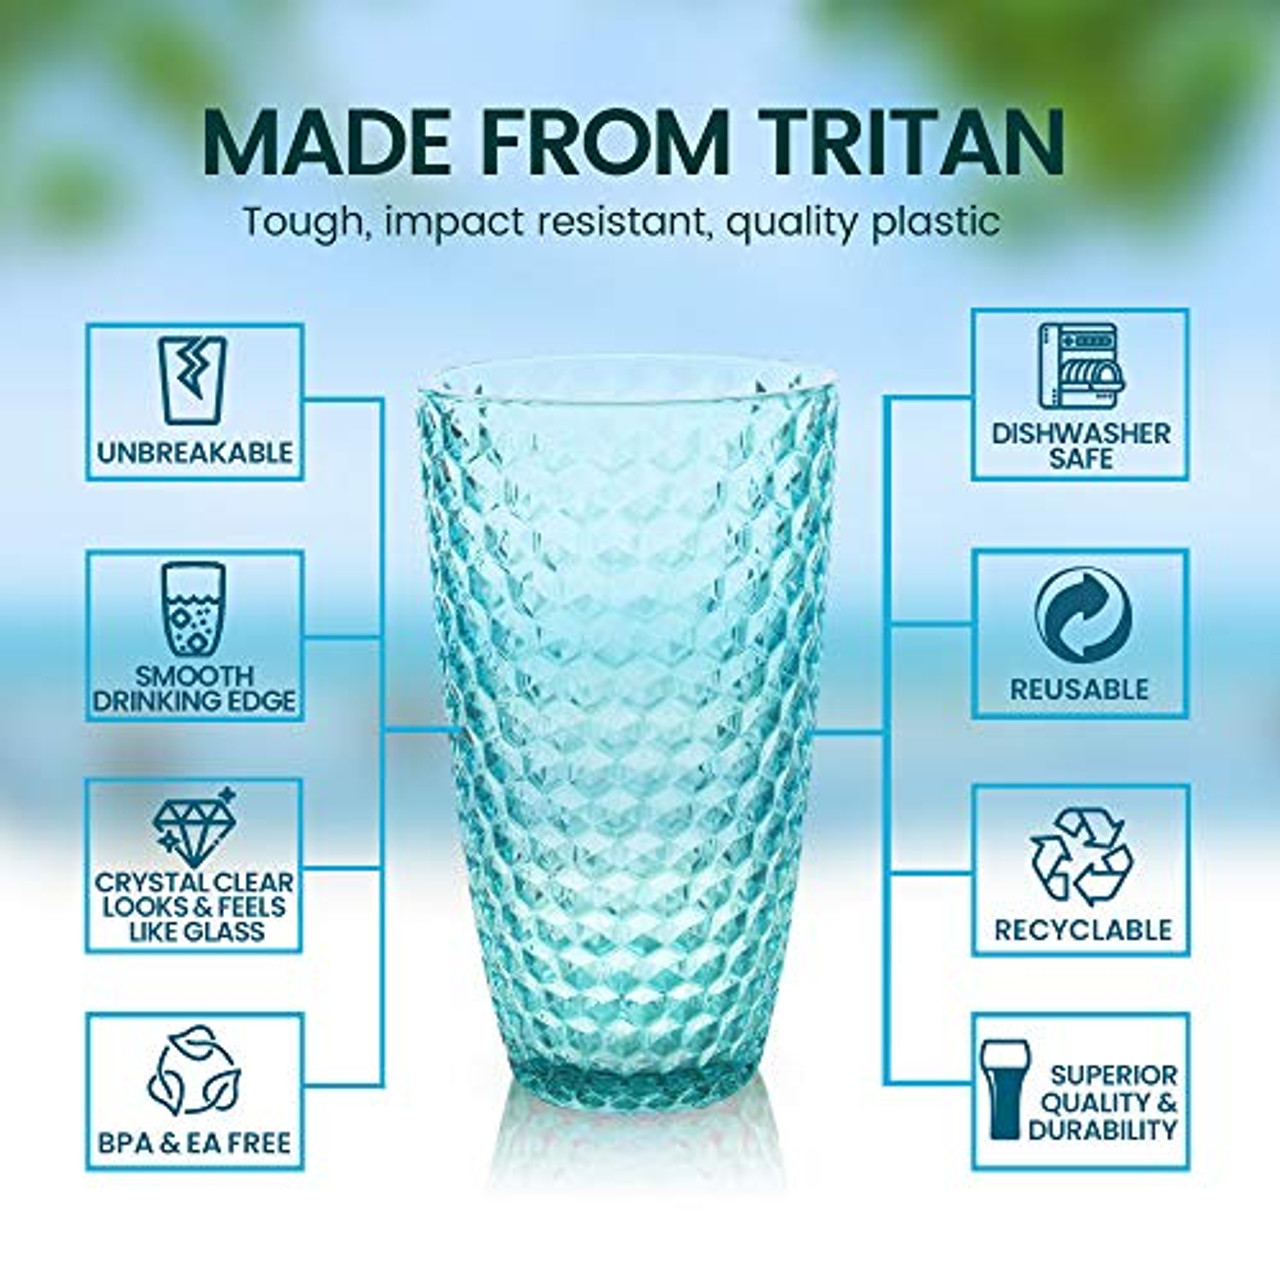 19 oz Unbreakable Premium Drinking Glasses - Set of 6 - Tritan Plastic  Tumbler Cups - Perfect for Gifts 